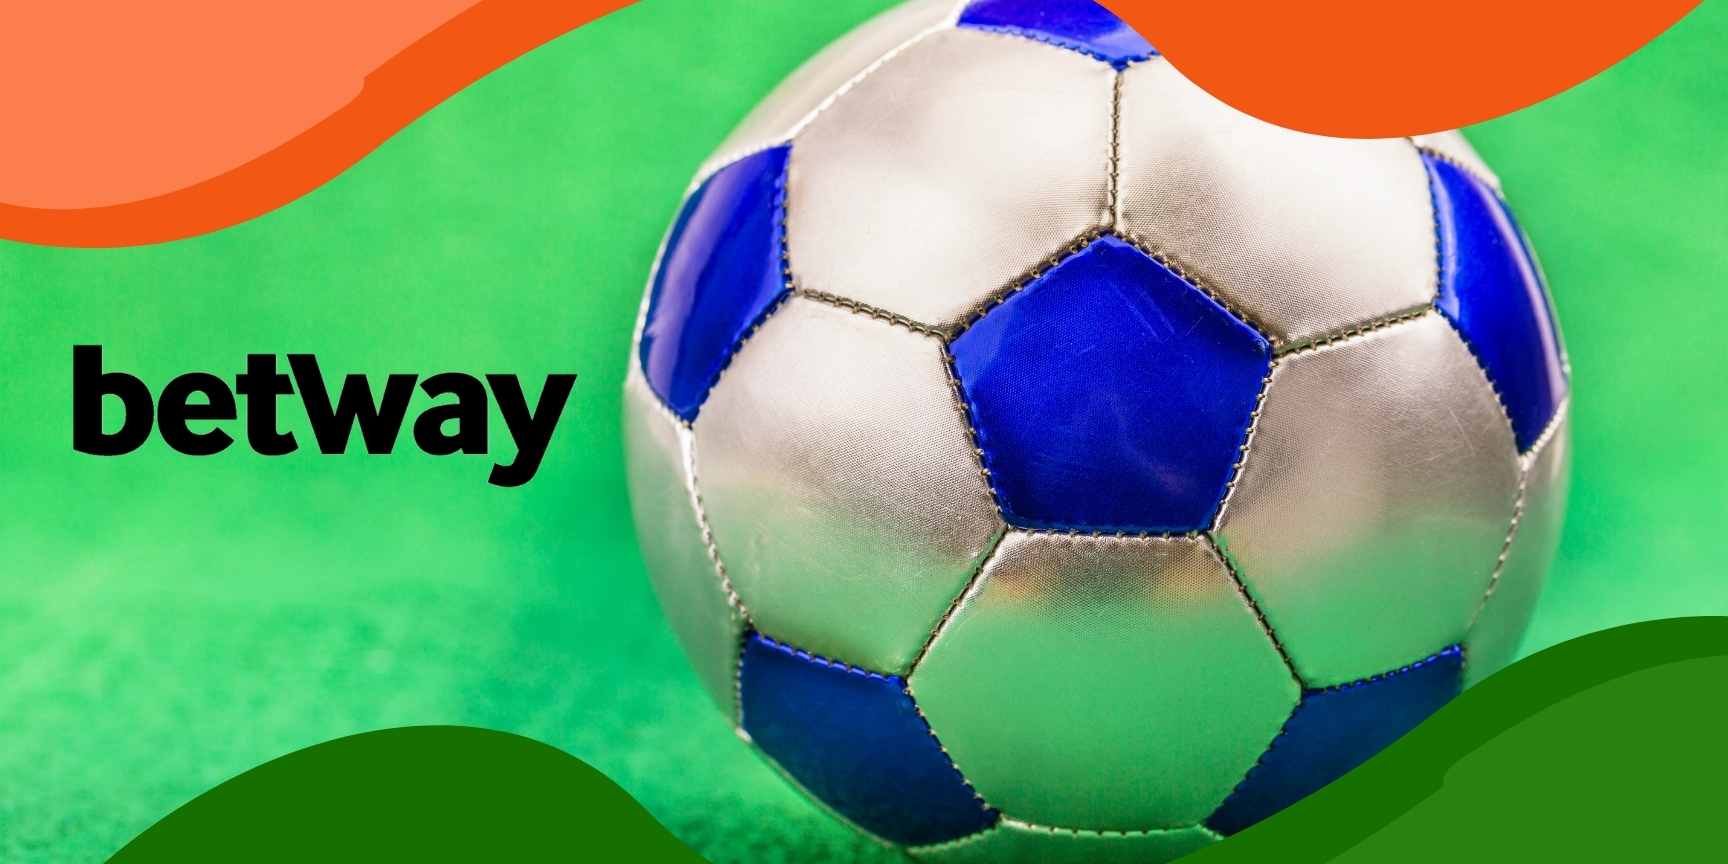 Everything about Betway sports betting